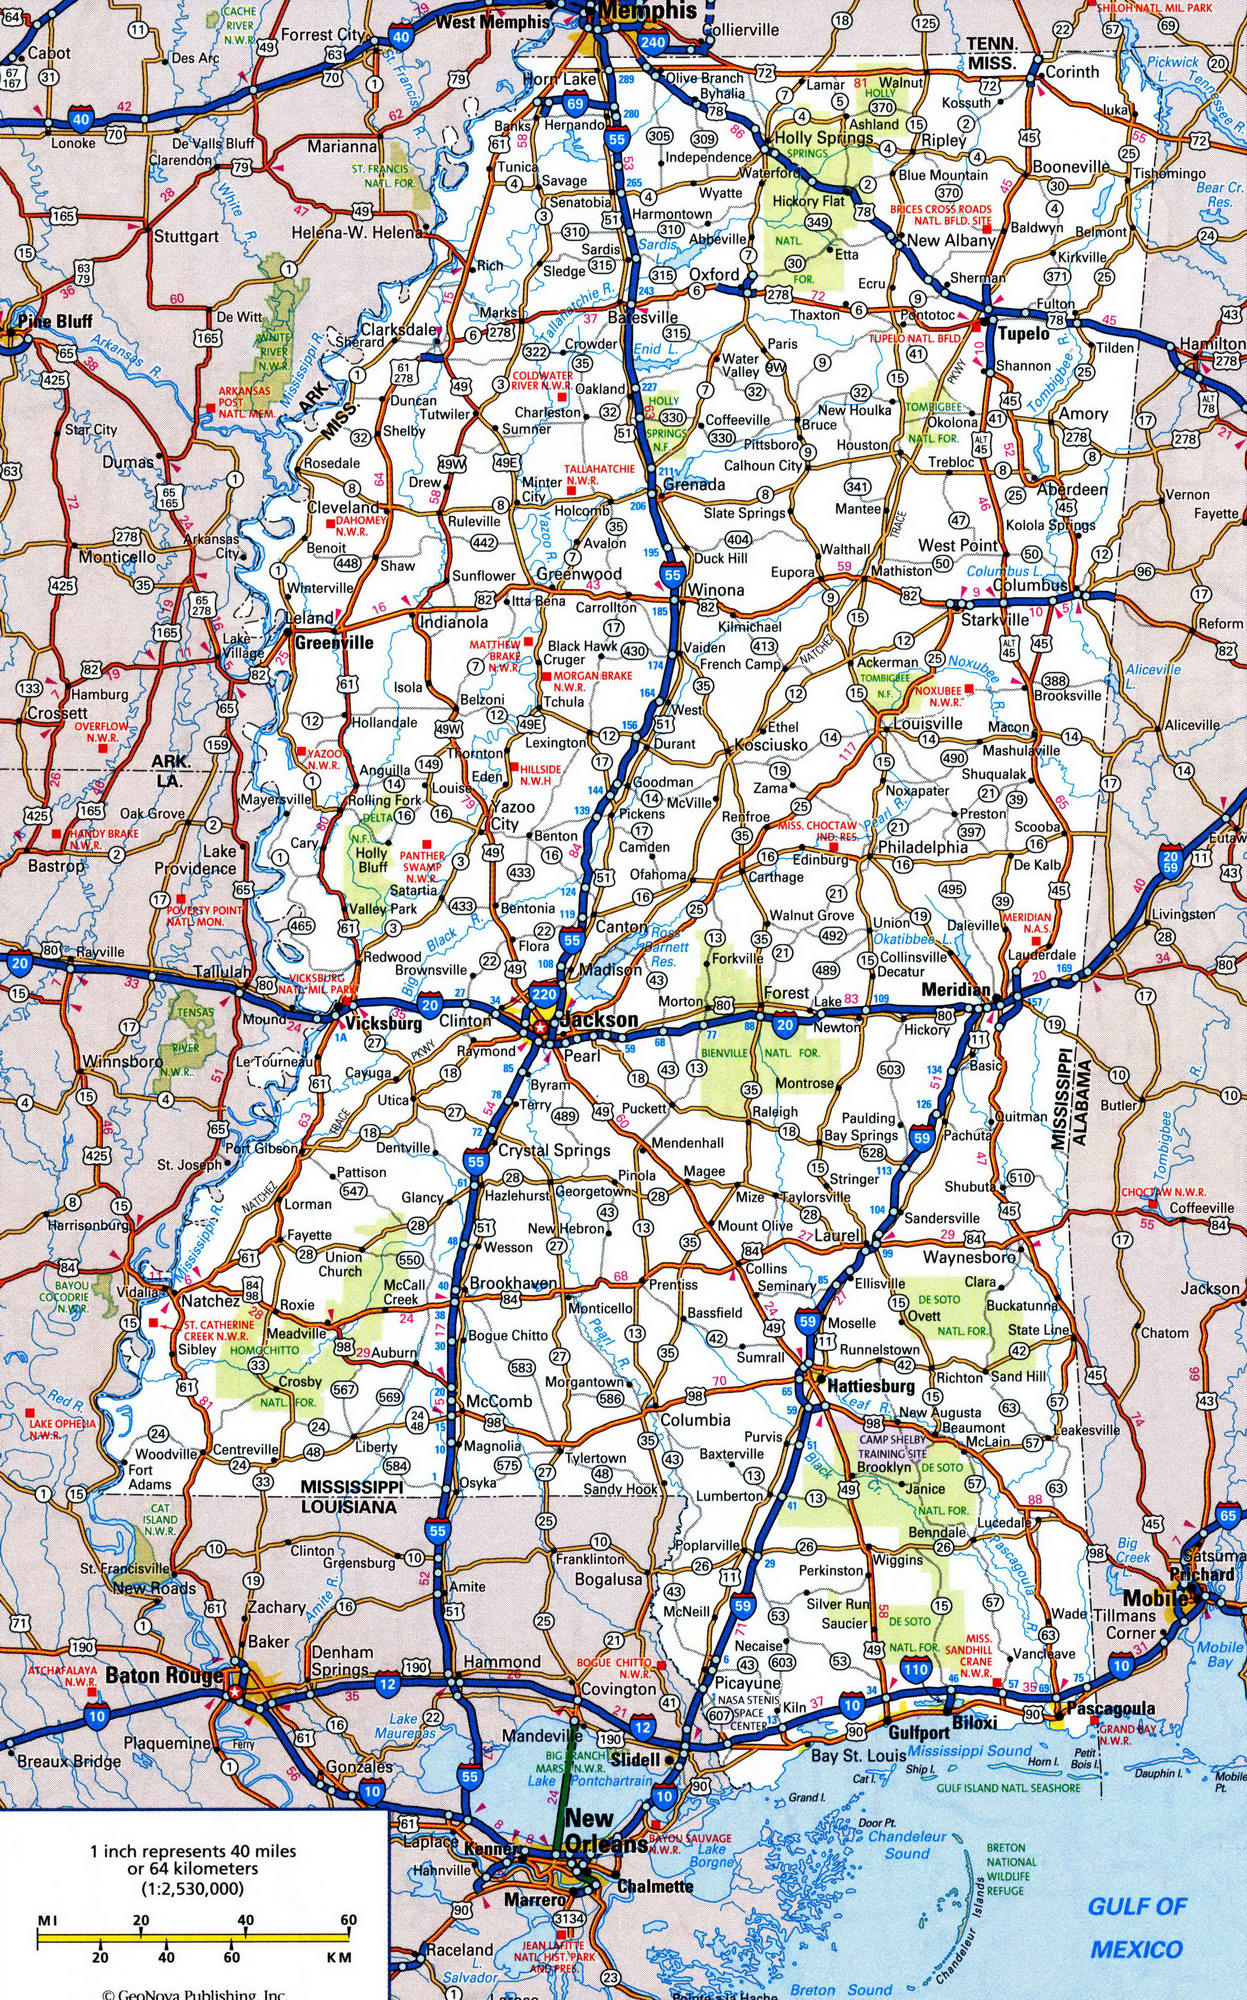 Detailed roads map of Mississippi